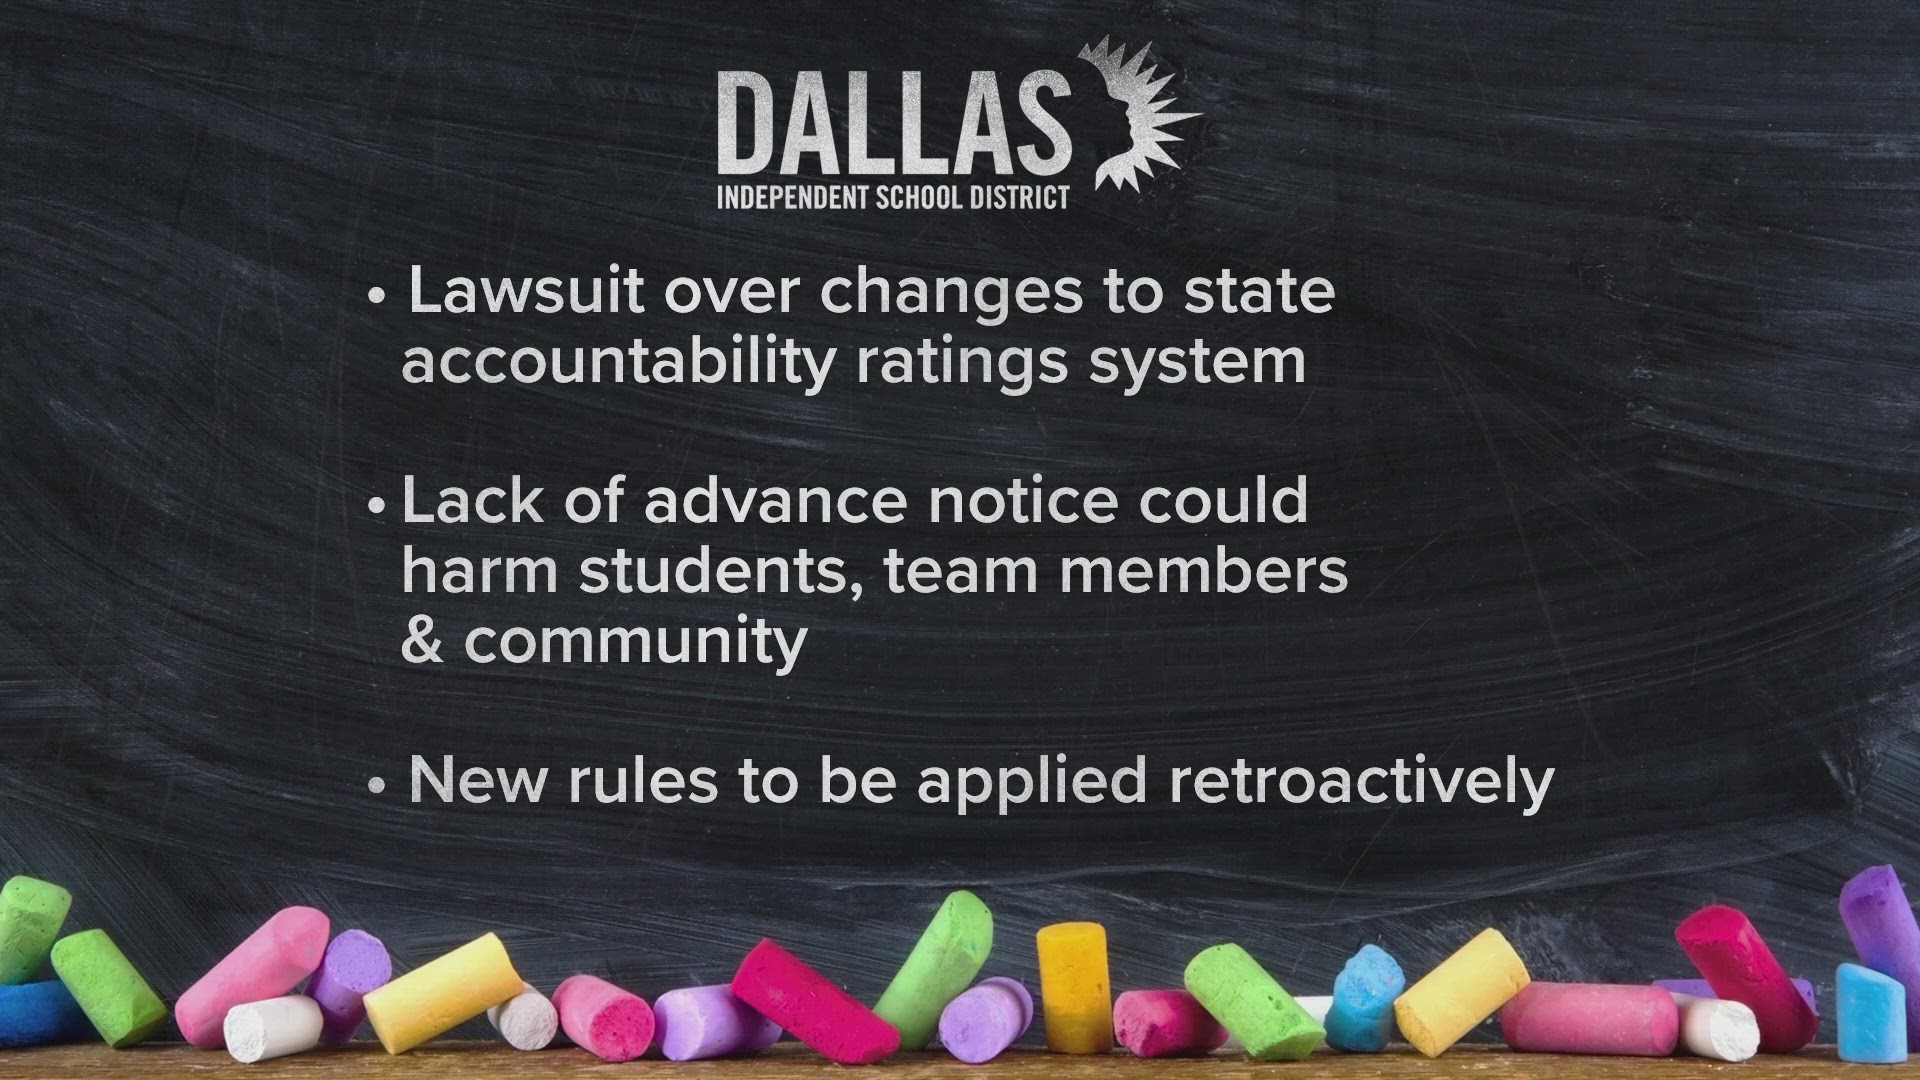 Dallas ISD joins almost 20 other school districts in the lawsuit.